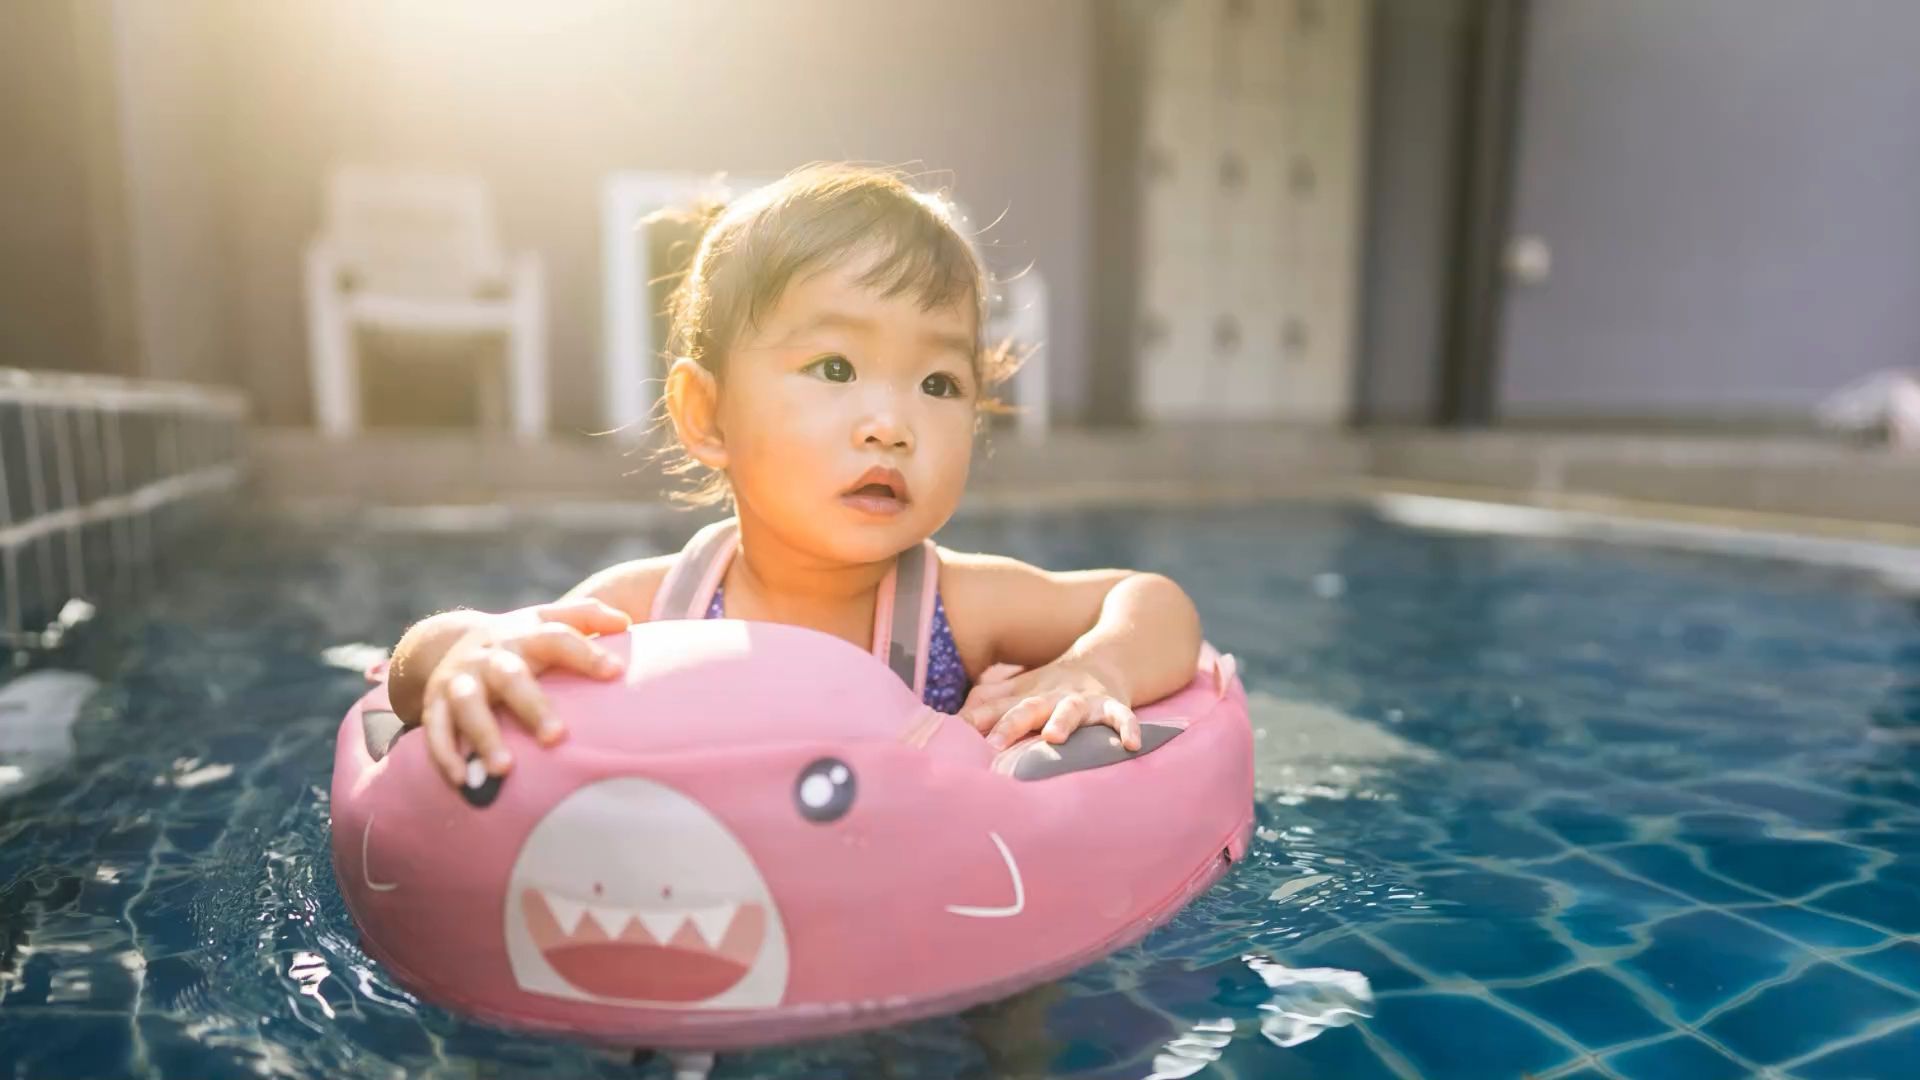 Overview of the safety of swimming aids for children